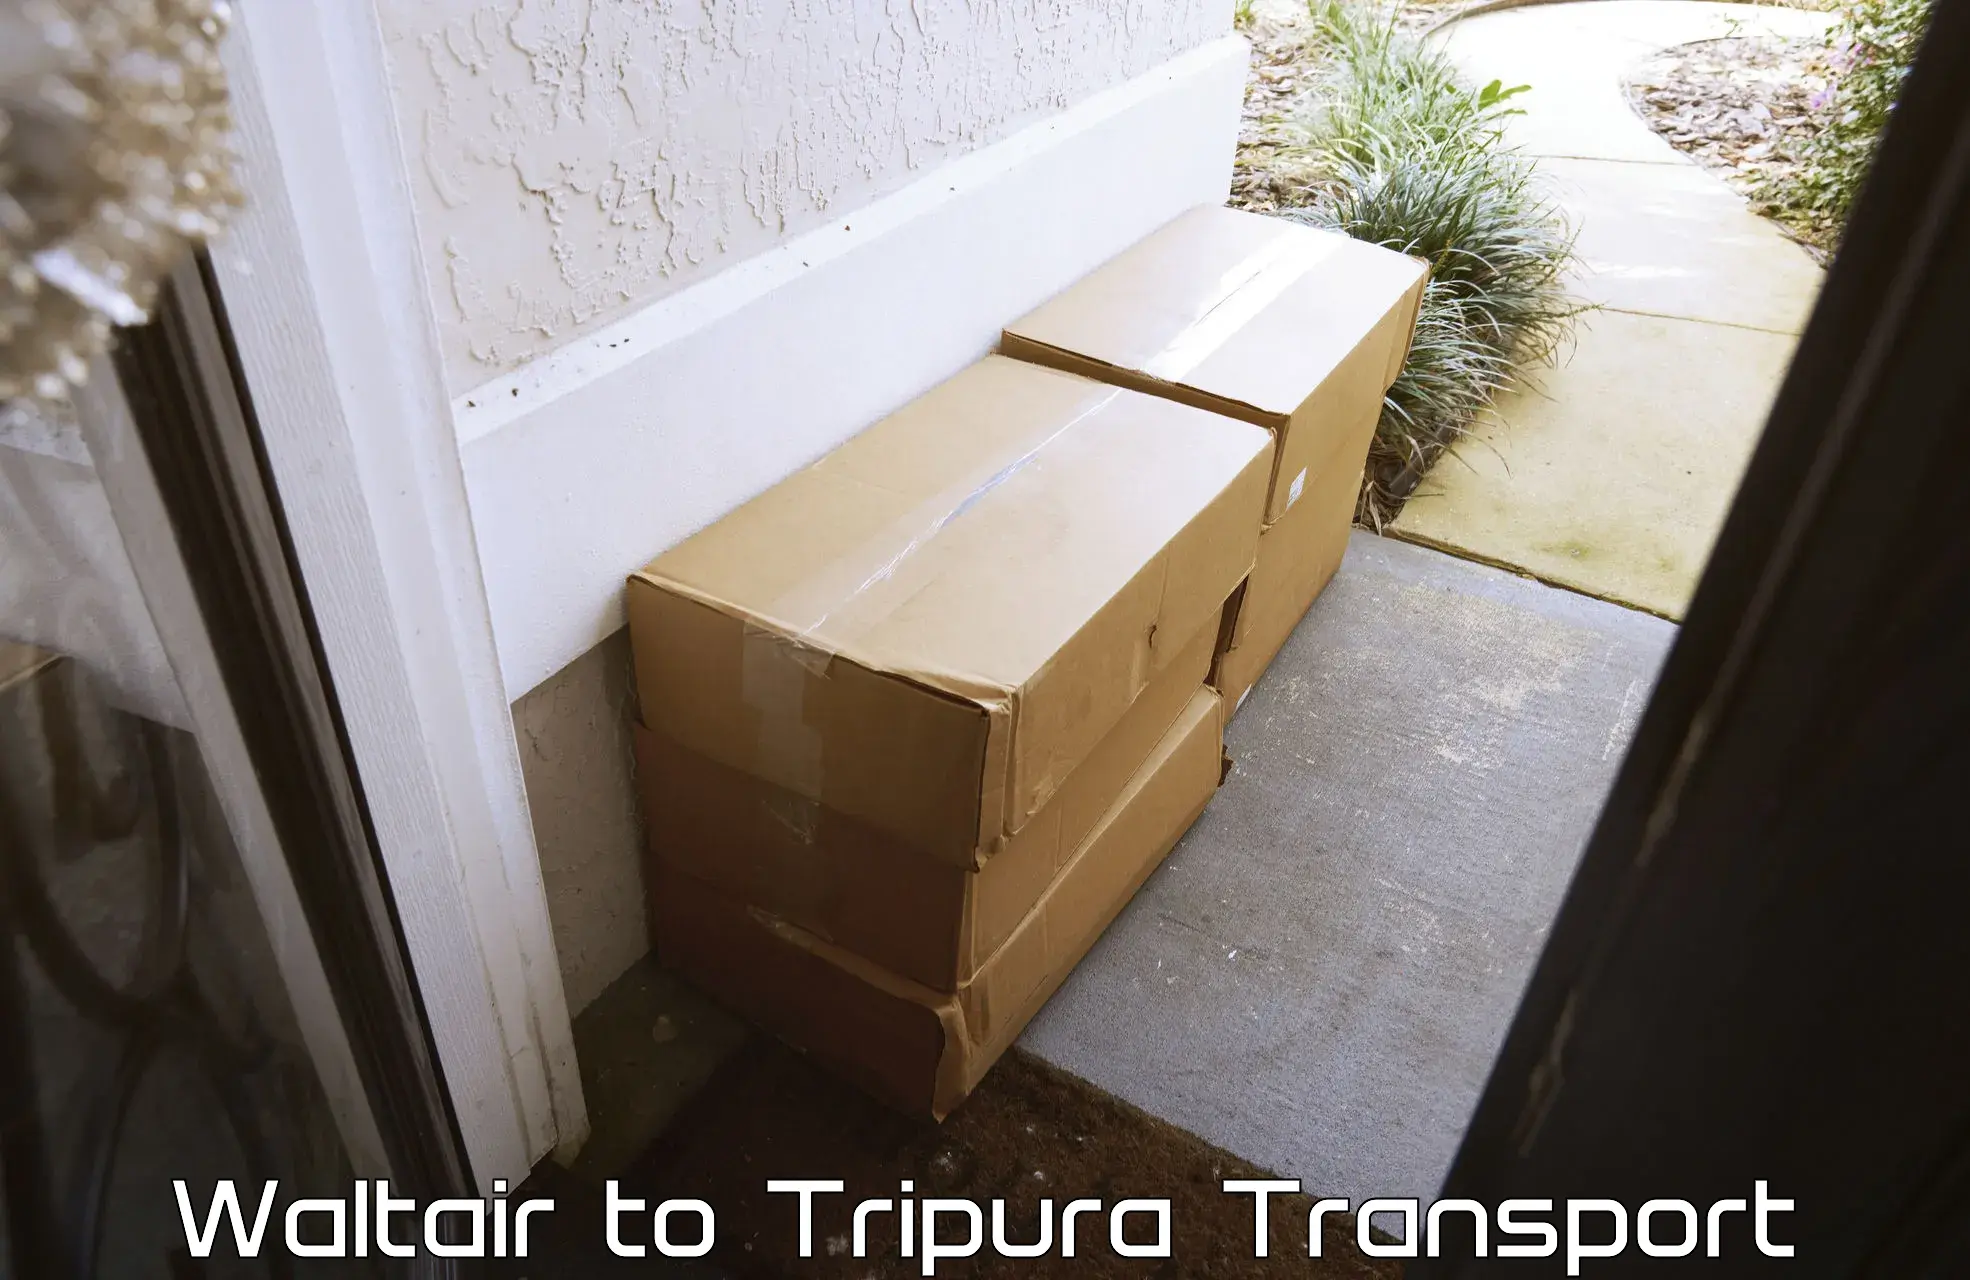 Cargo transport services in Waltair to Udaipur Tripura